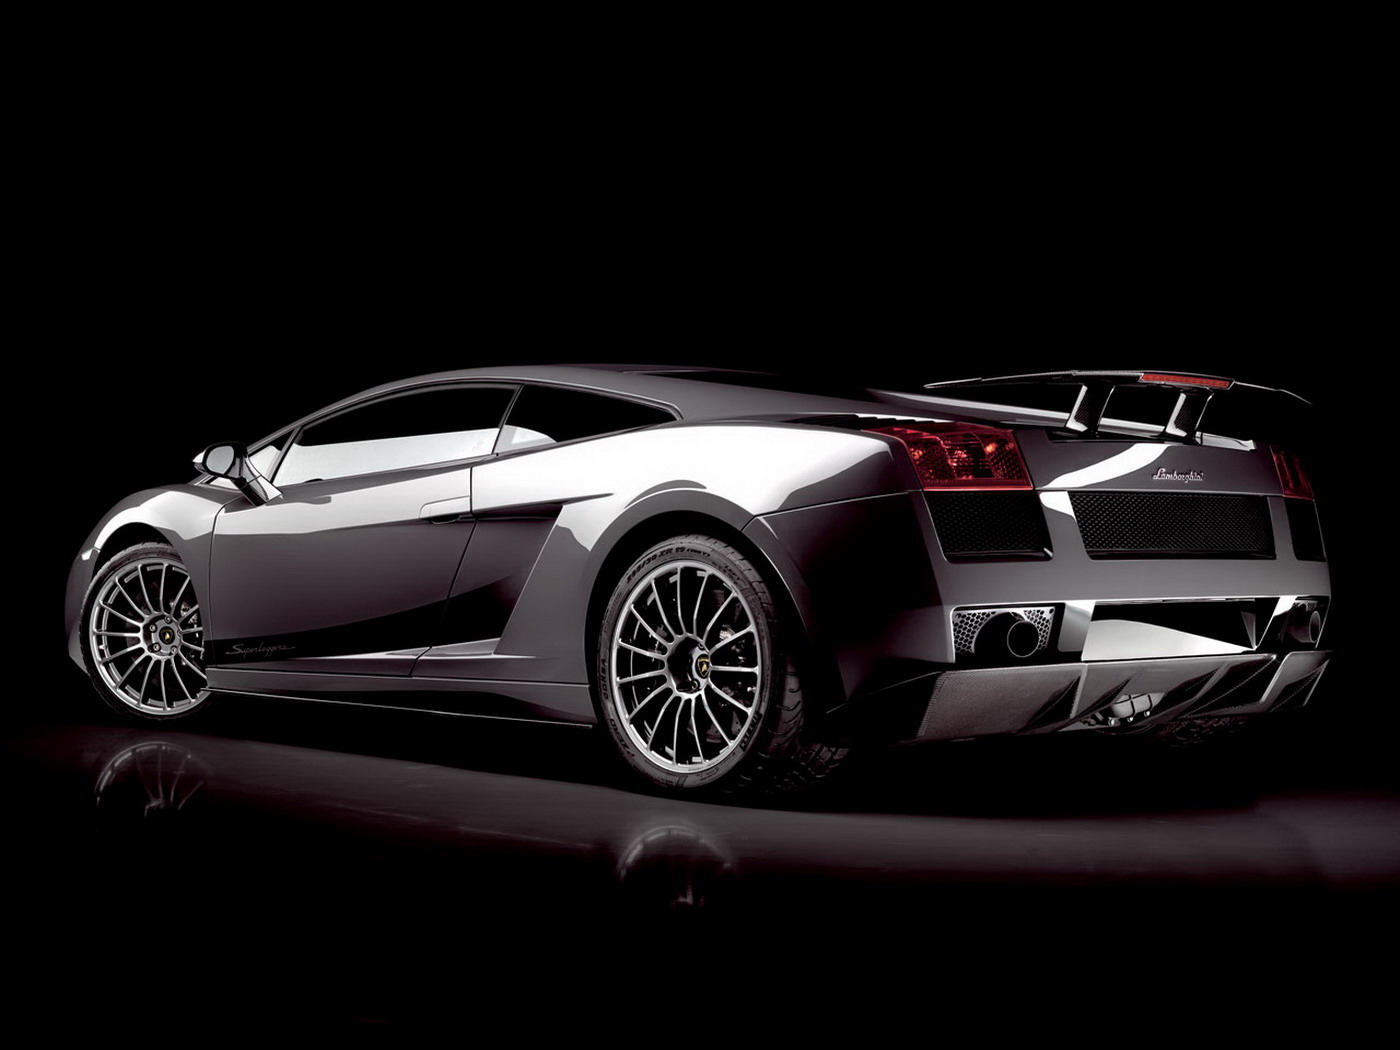 Click To See World Amazing car  wallpapers  hd 